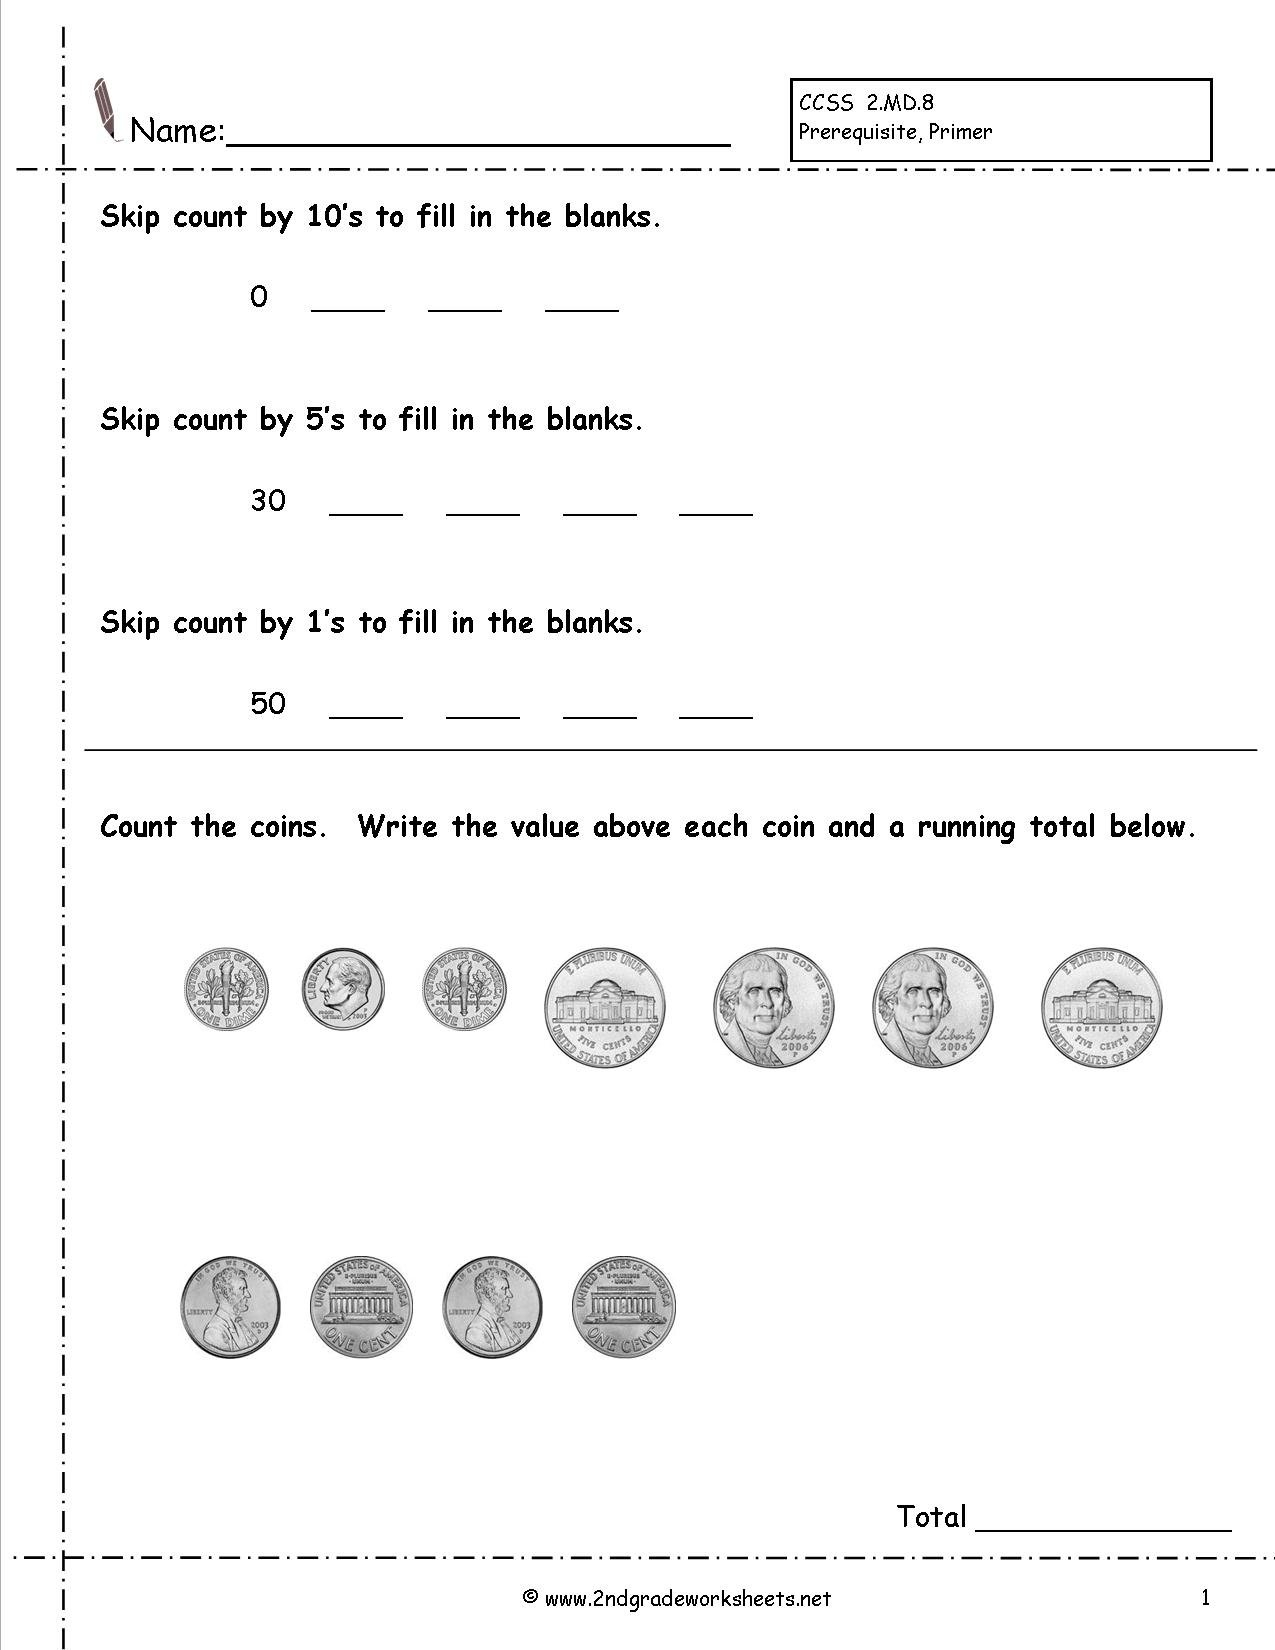 Ccss 2Md8 Worksheets Counting Coins Worksheets Money Throughout 8Th Grade Common Core Math Worksheets